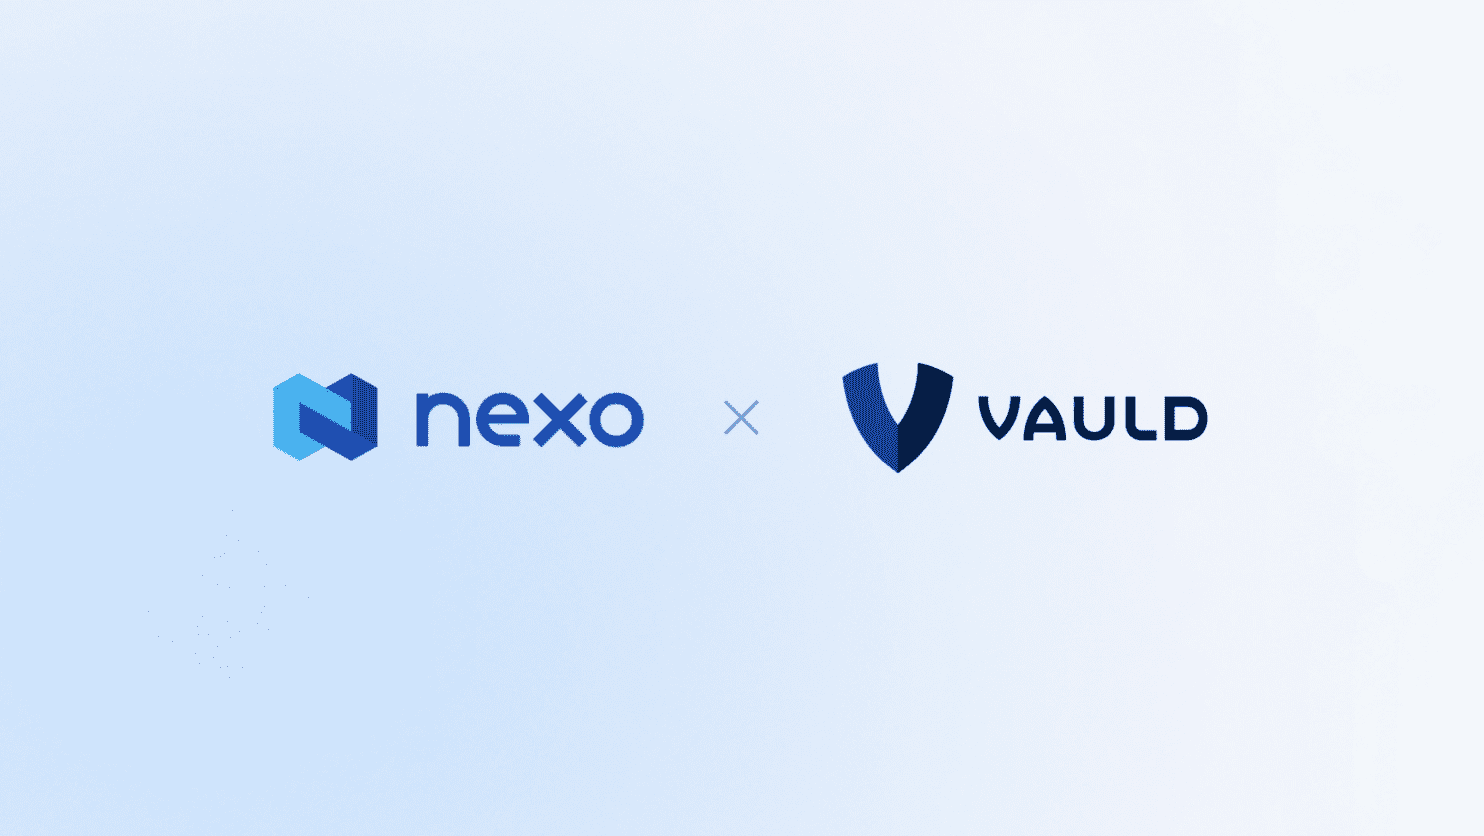 Cryptocurrency lender Nexo in talks to acquire “up to 100%” of Vauld.